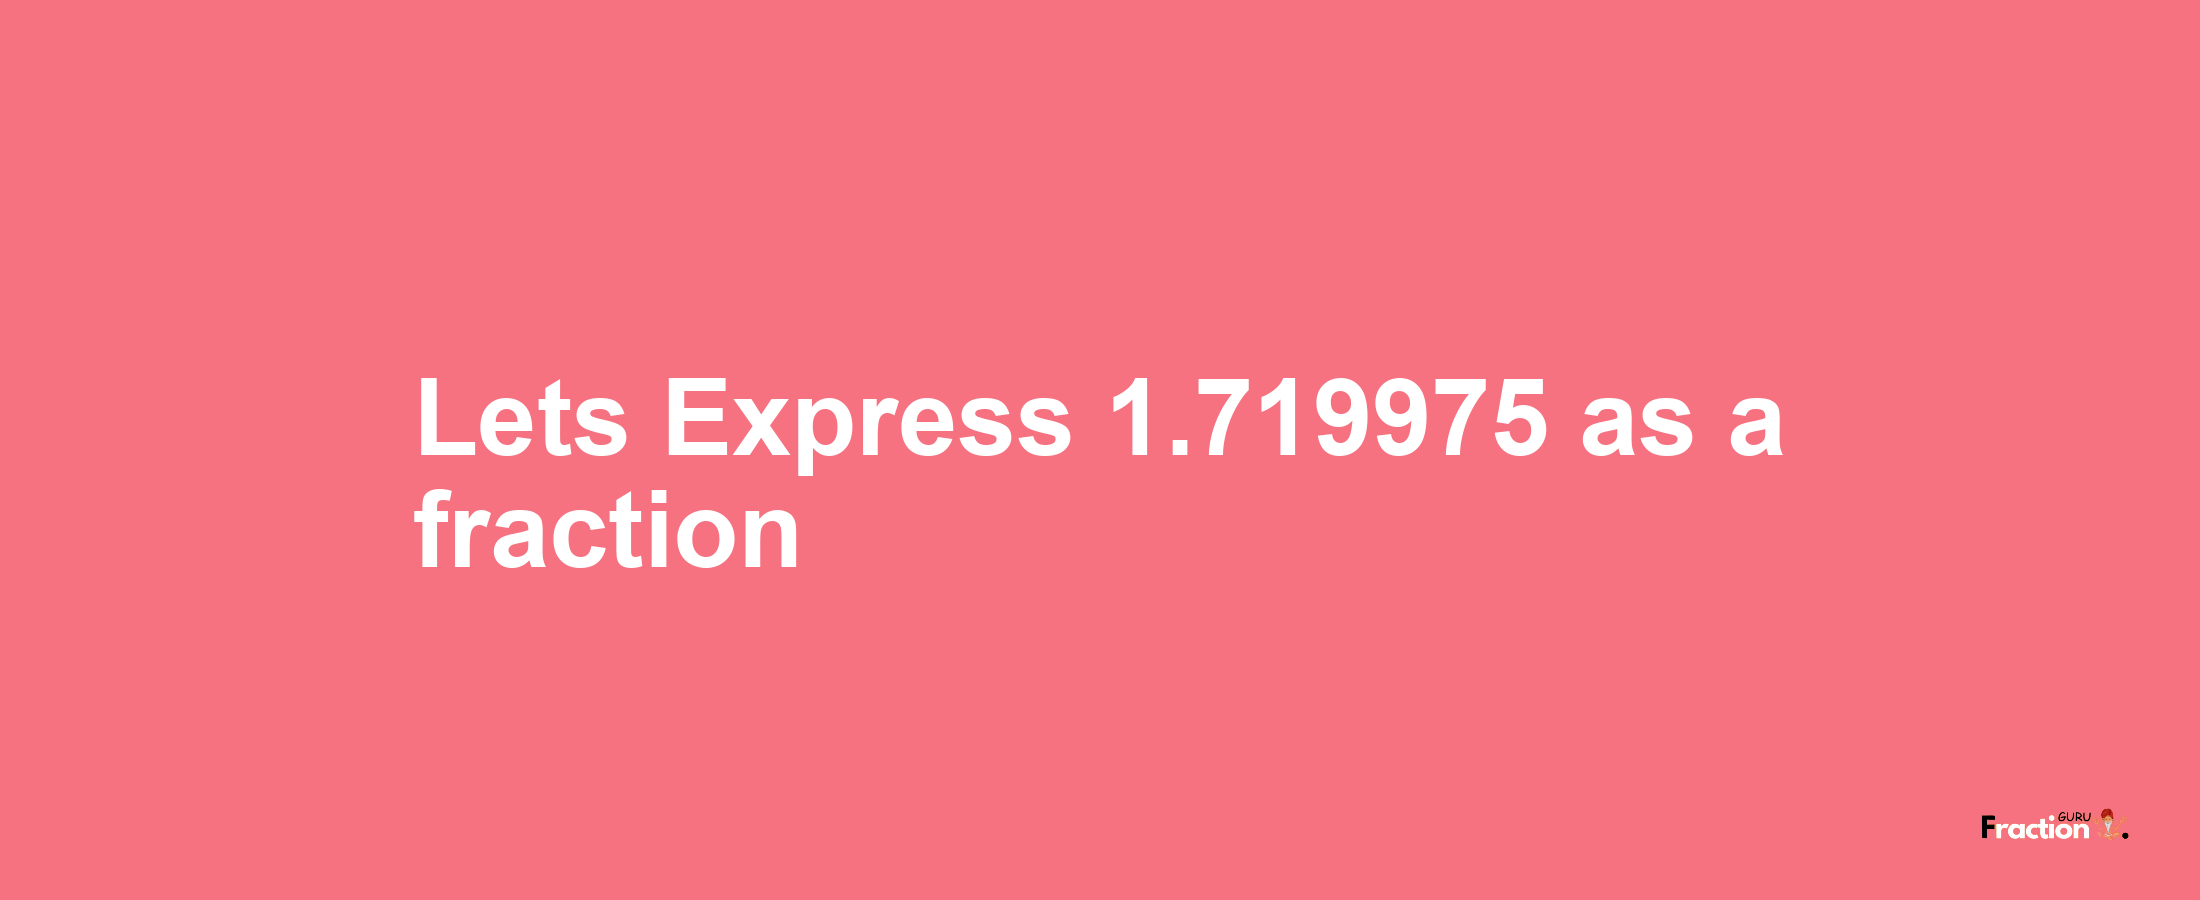 Lets Express 1.719975 as afraction